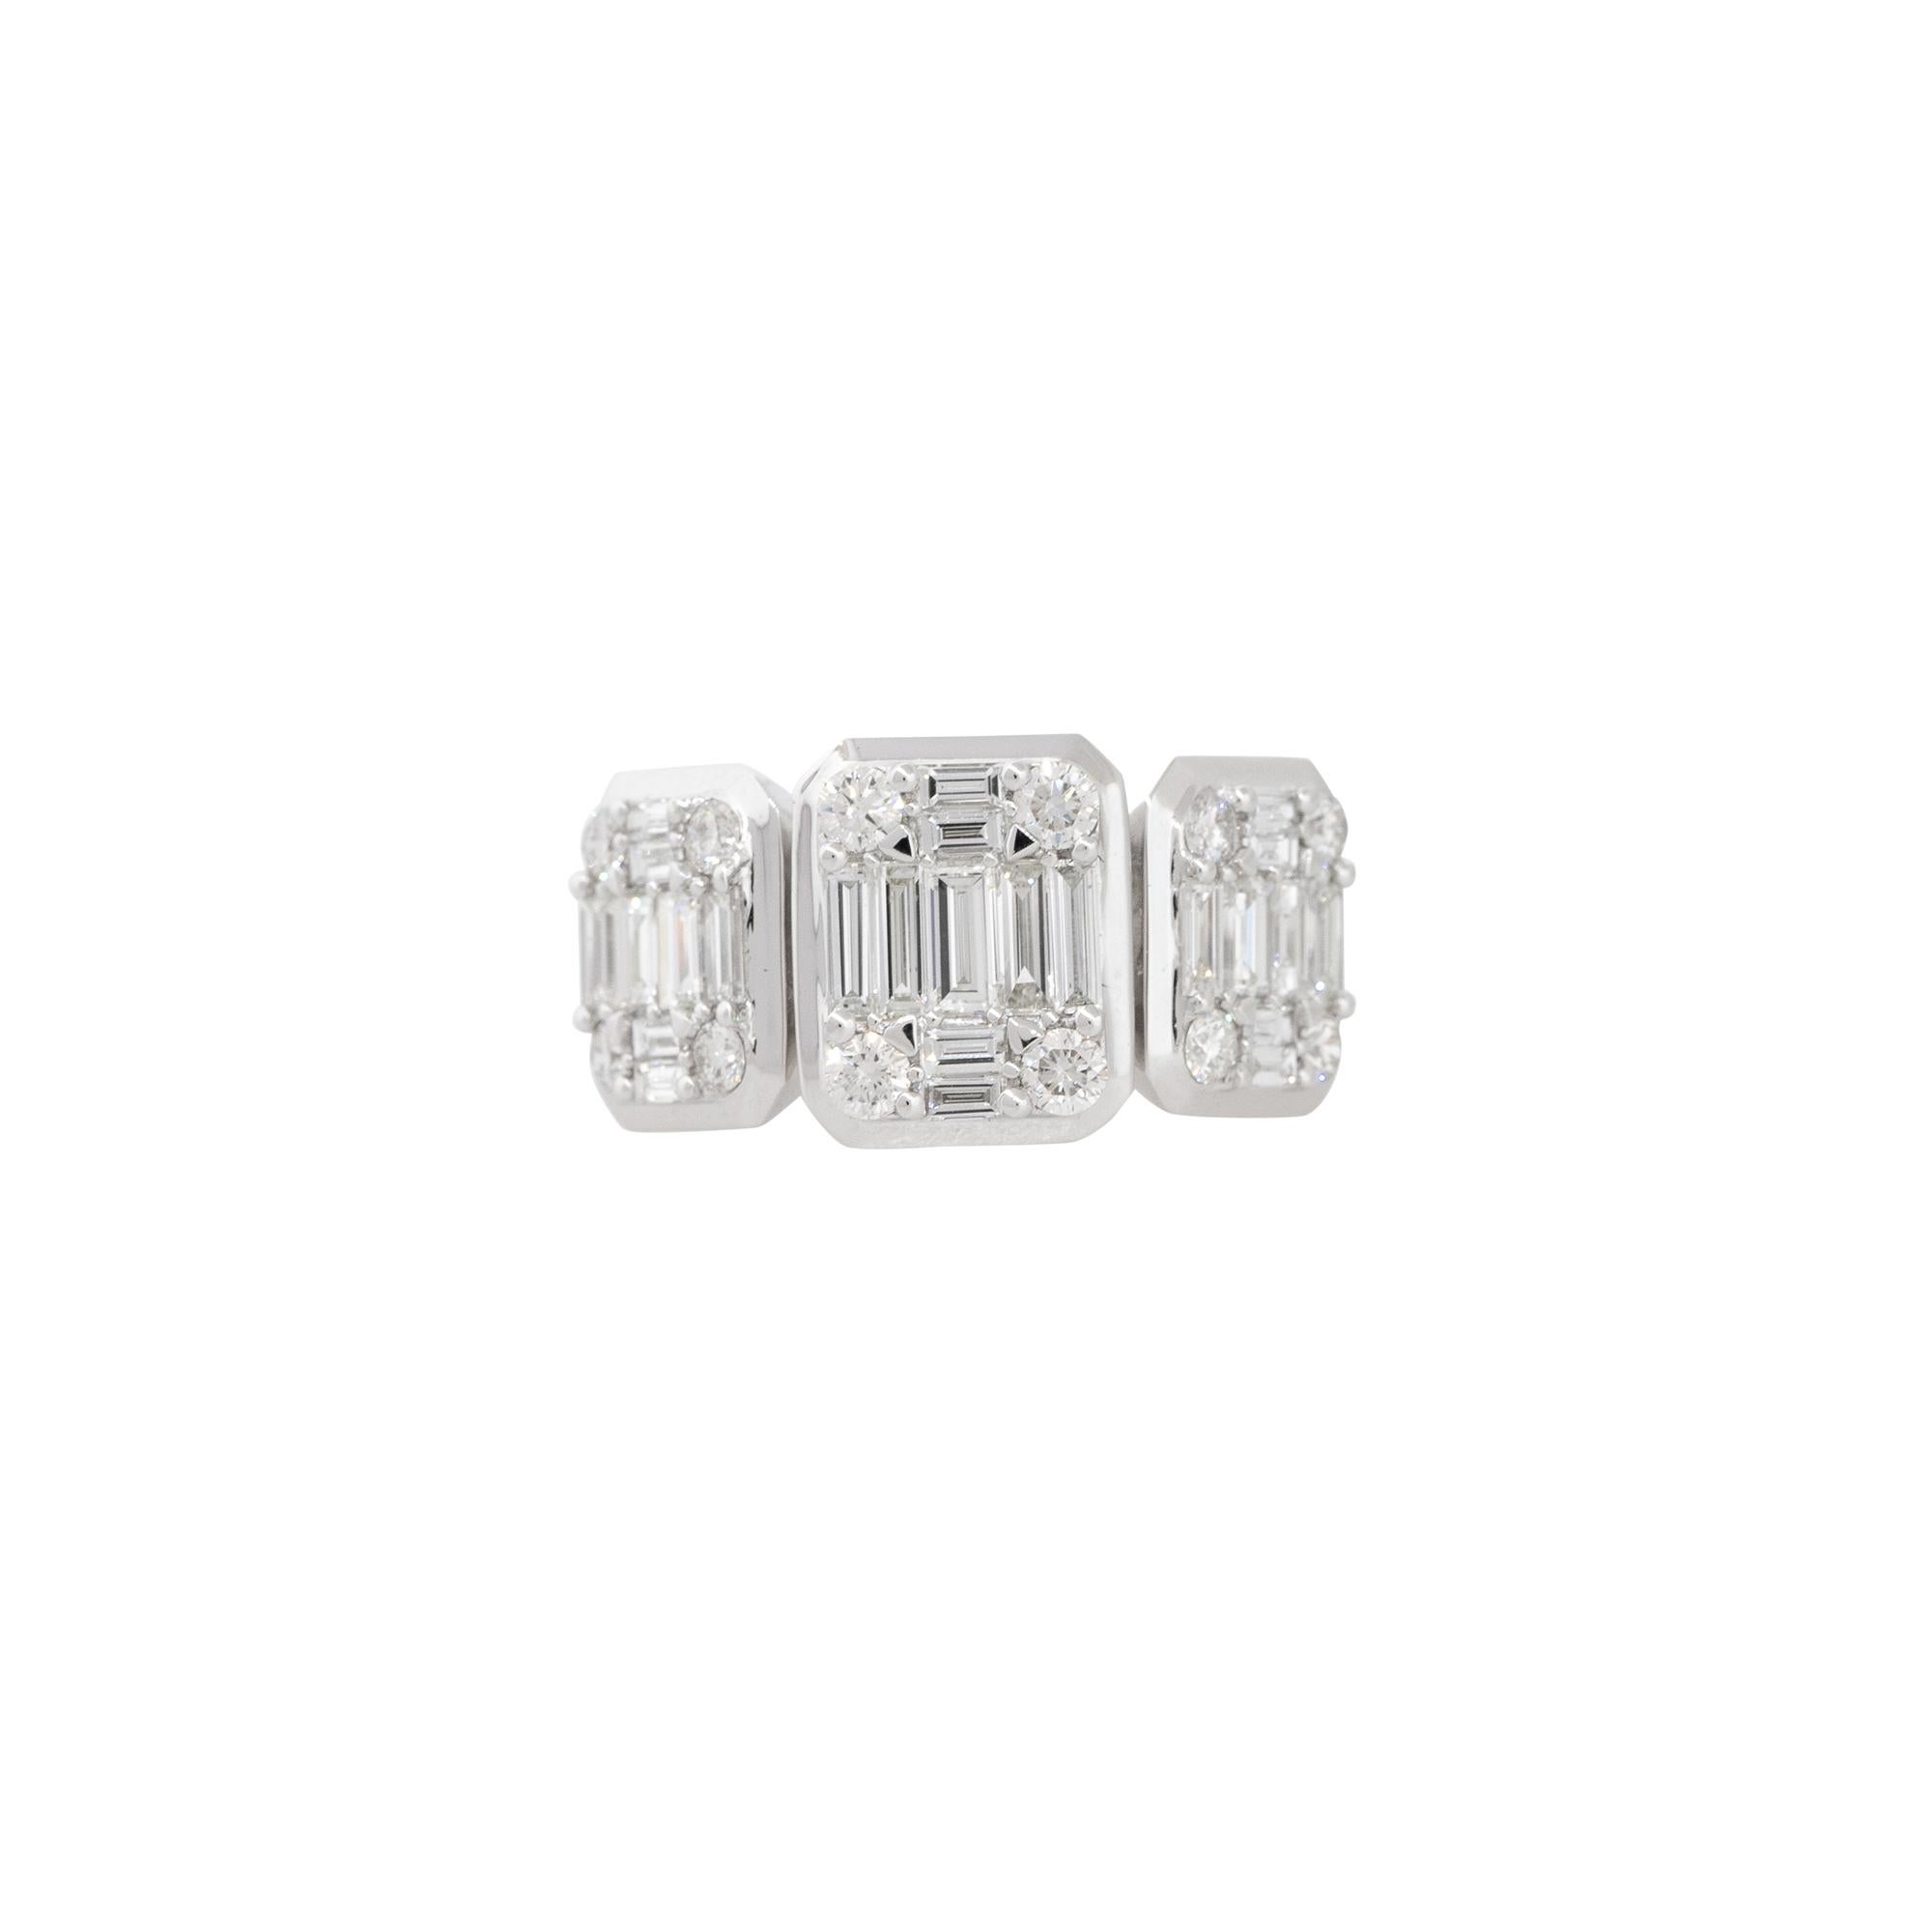 18k White Gold 2.25ctw Diamond 3 Station Mosaic Ring
Style: Women's Diamond Mosaic Ring
Material: 18k White Gold
Main Diamond Details: Approximately 2.25ctw of mixed shape Diamonds. There are 3 square shaped diamond mosaic stations with 37 diamonds